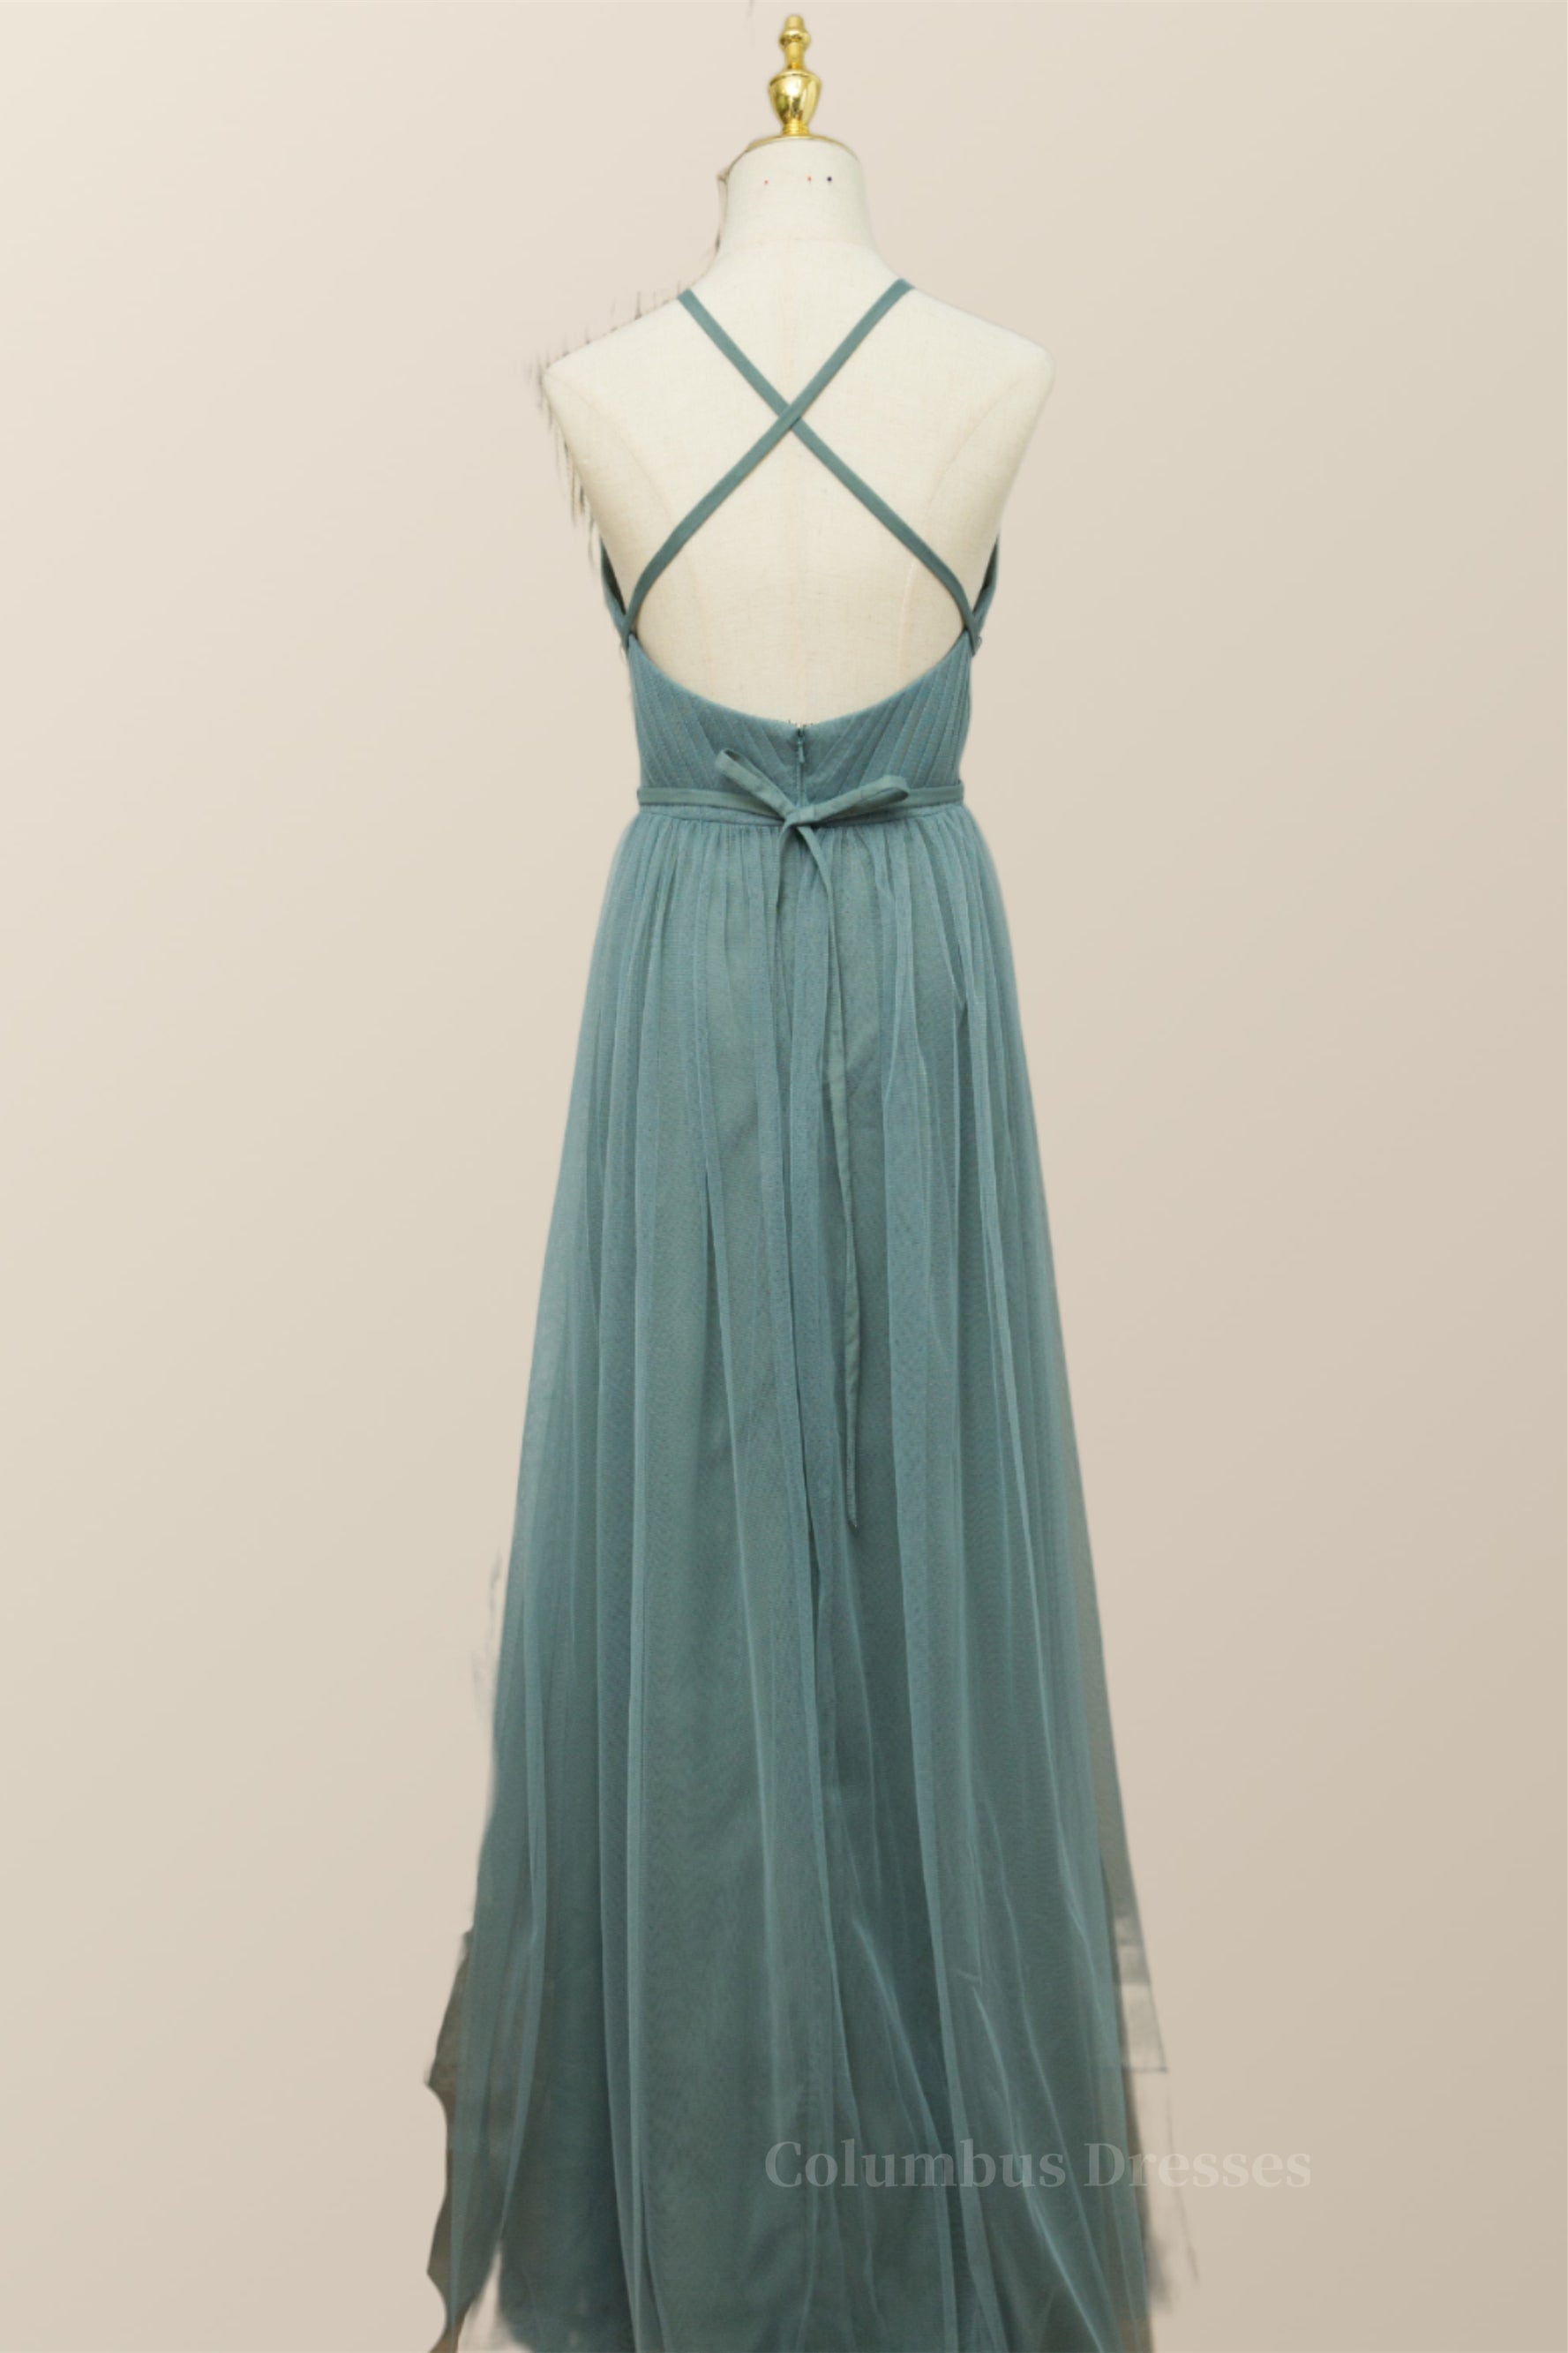 Party Dresses In Store, Sea Glass Tulle Bridesmaid Dress with Cross Back